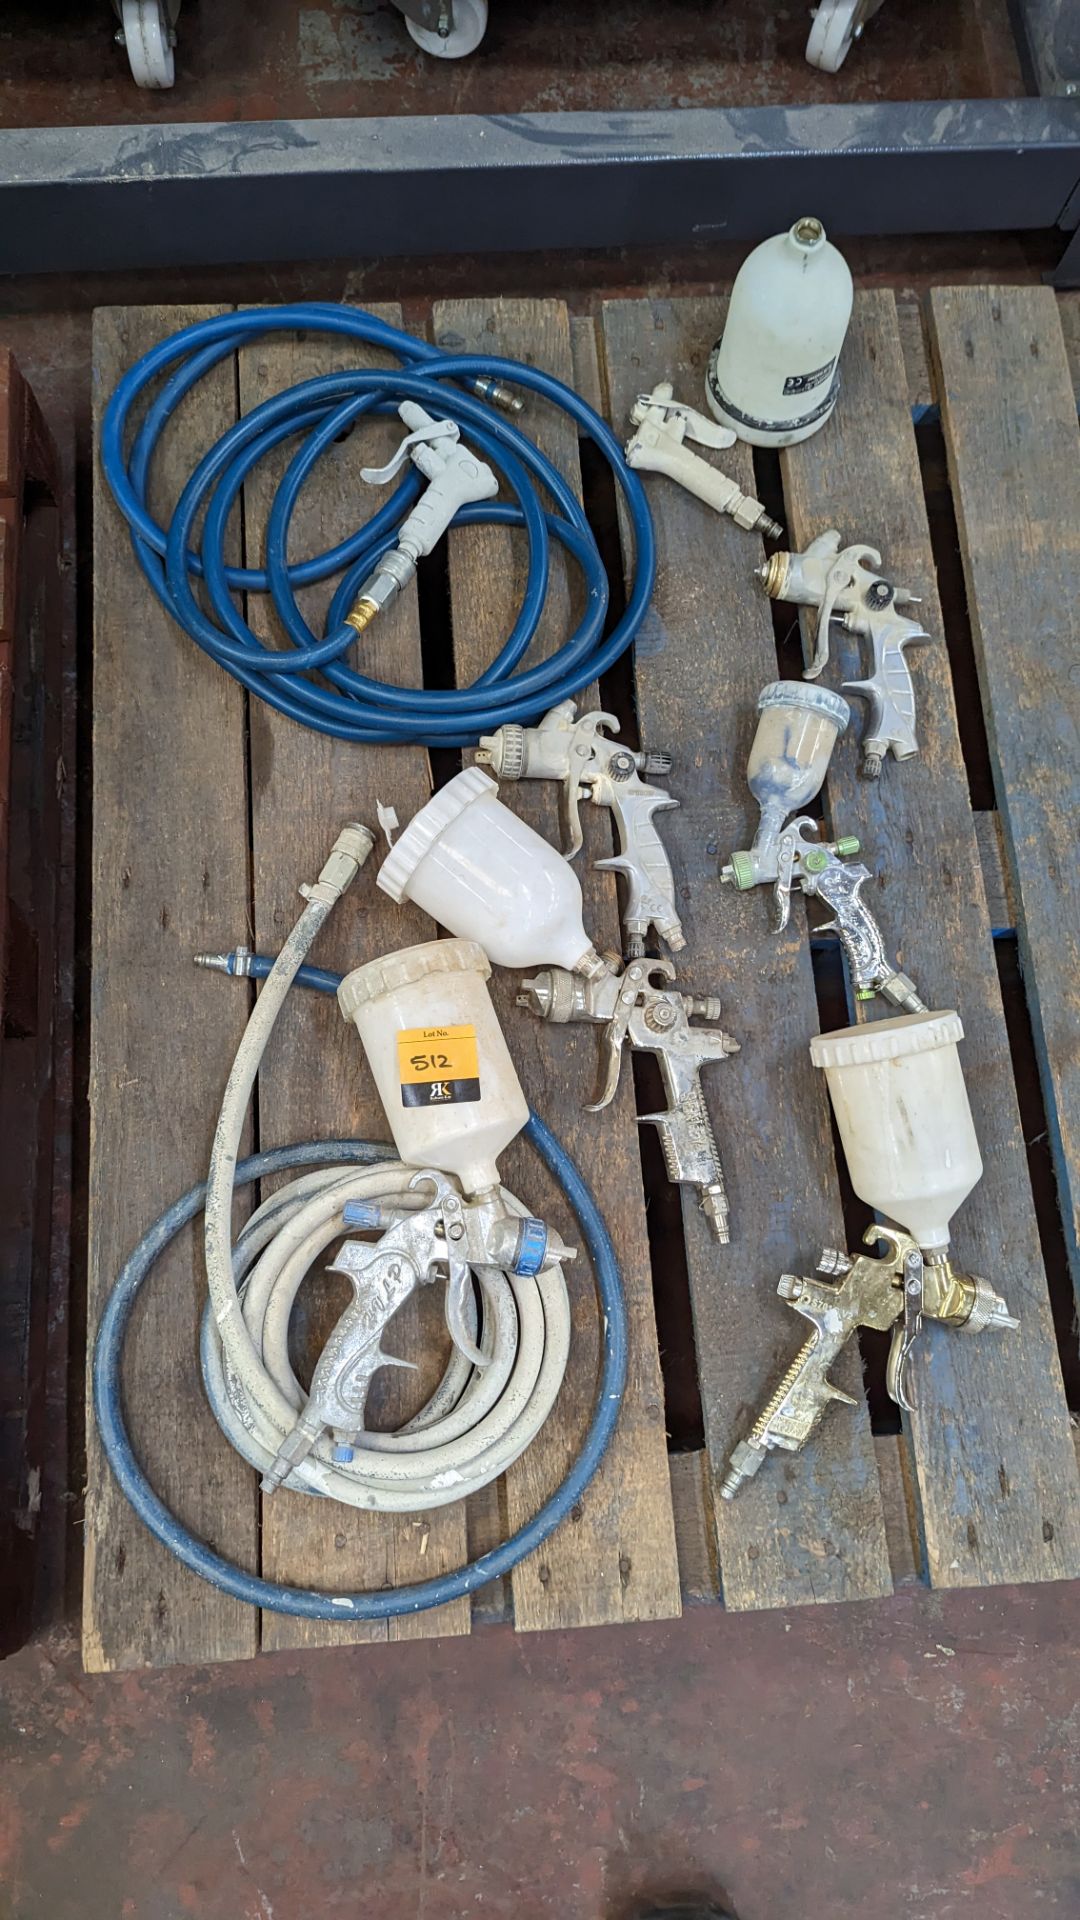 Quantity of spray paint guns & other related equipment as pictured - this lot in total comprises 8 s